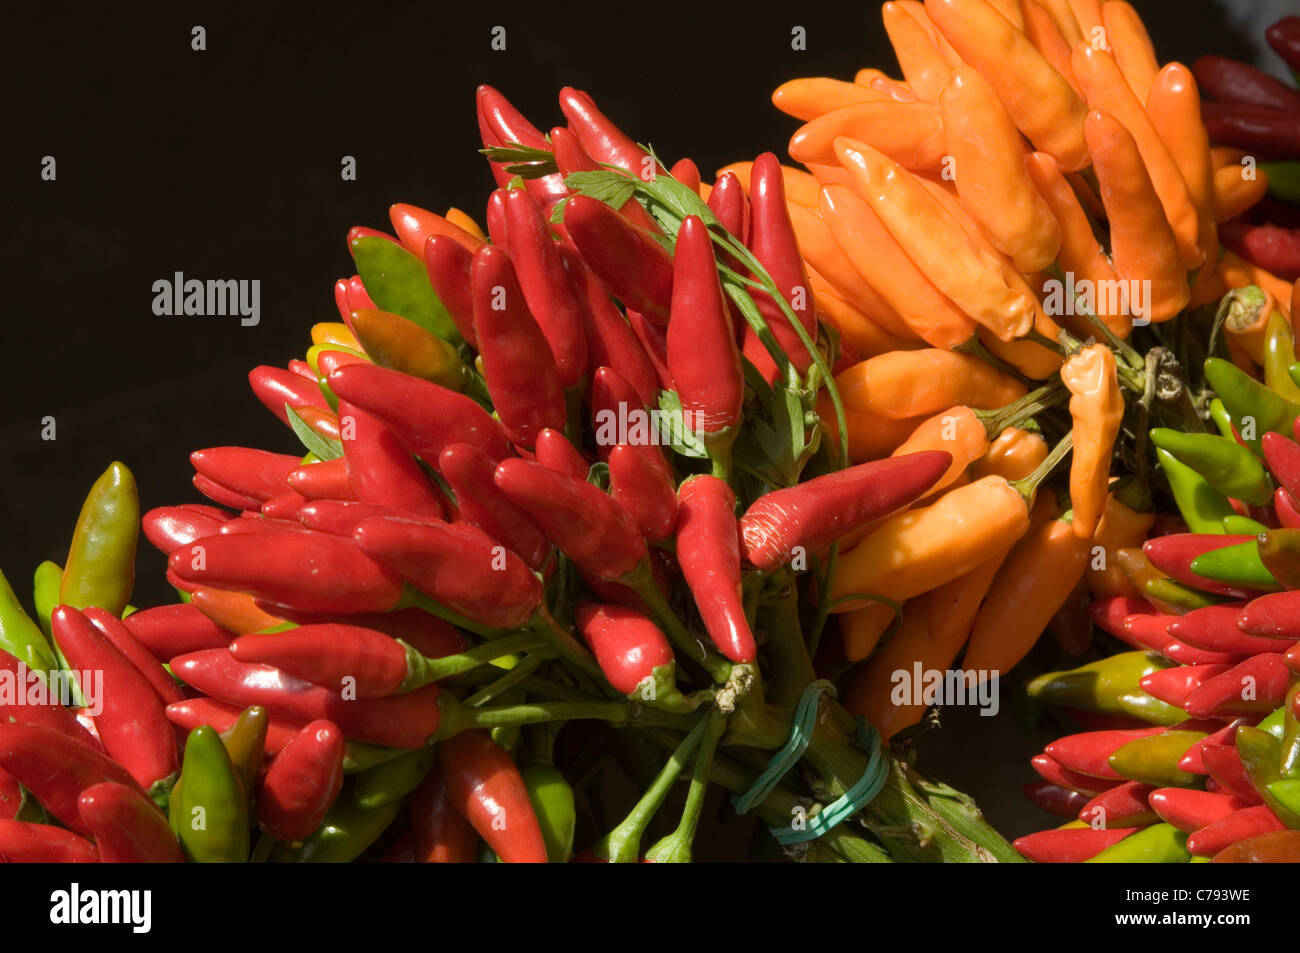 chile chiles chille chilles red hot spice spicy spices taste flavor flavored bunch bunches bunched Stock Photo